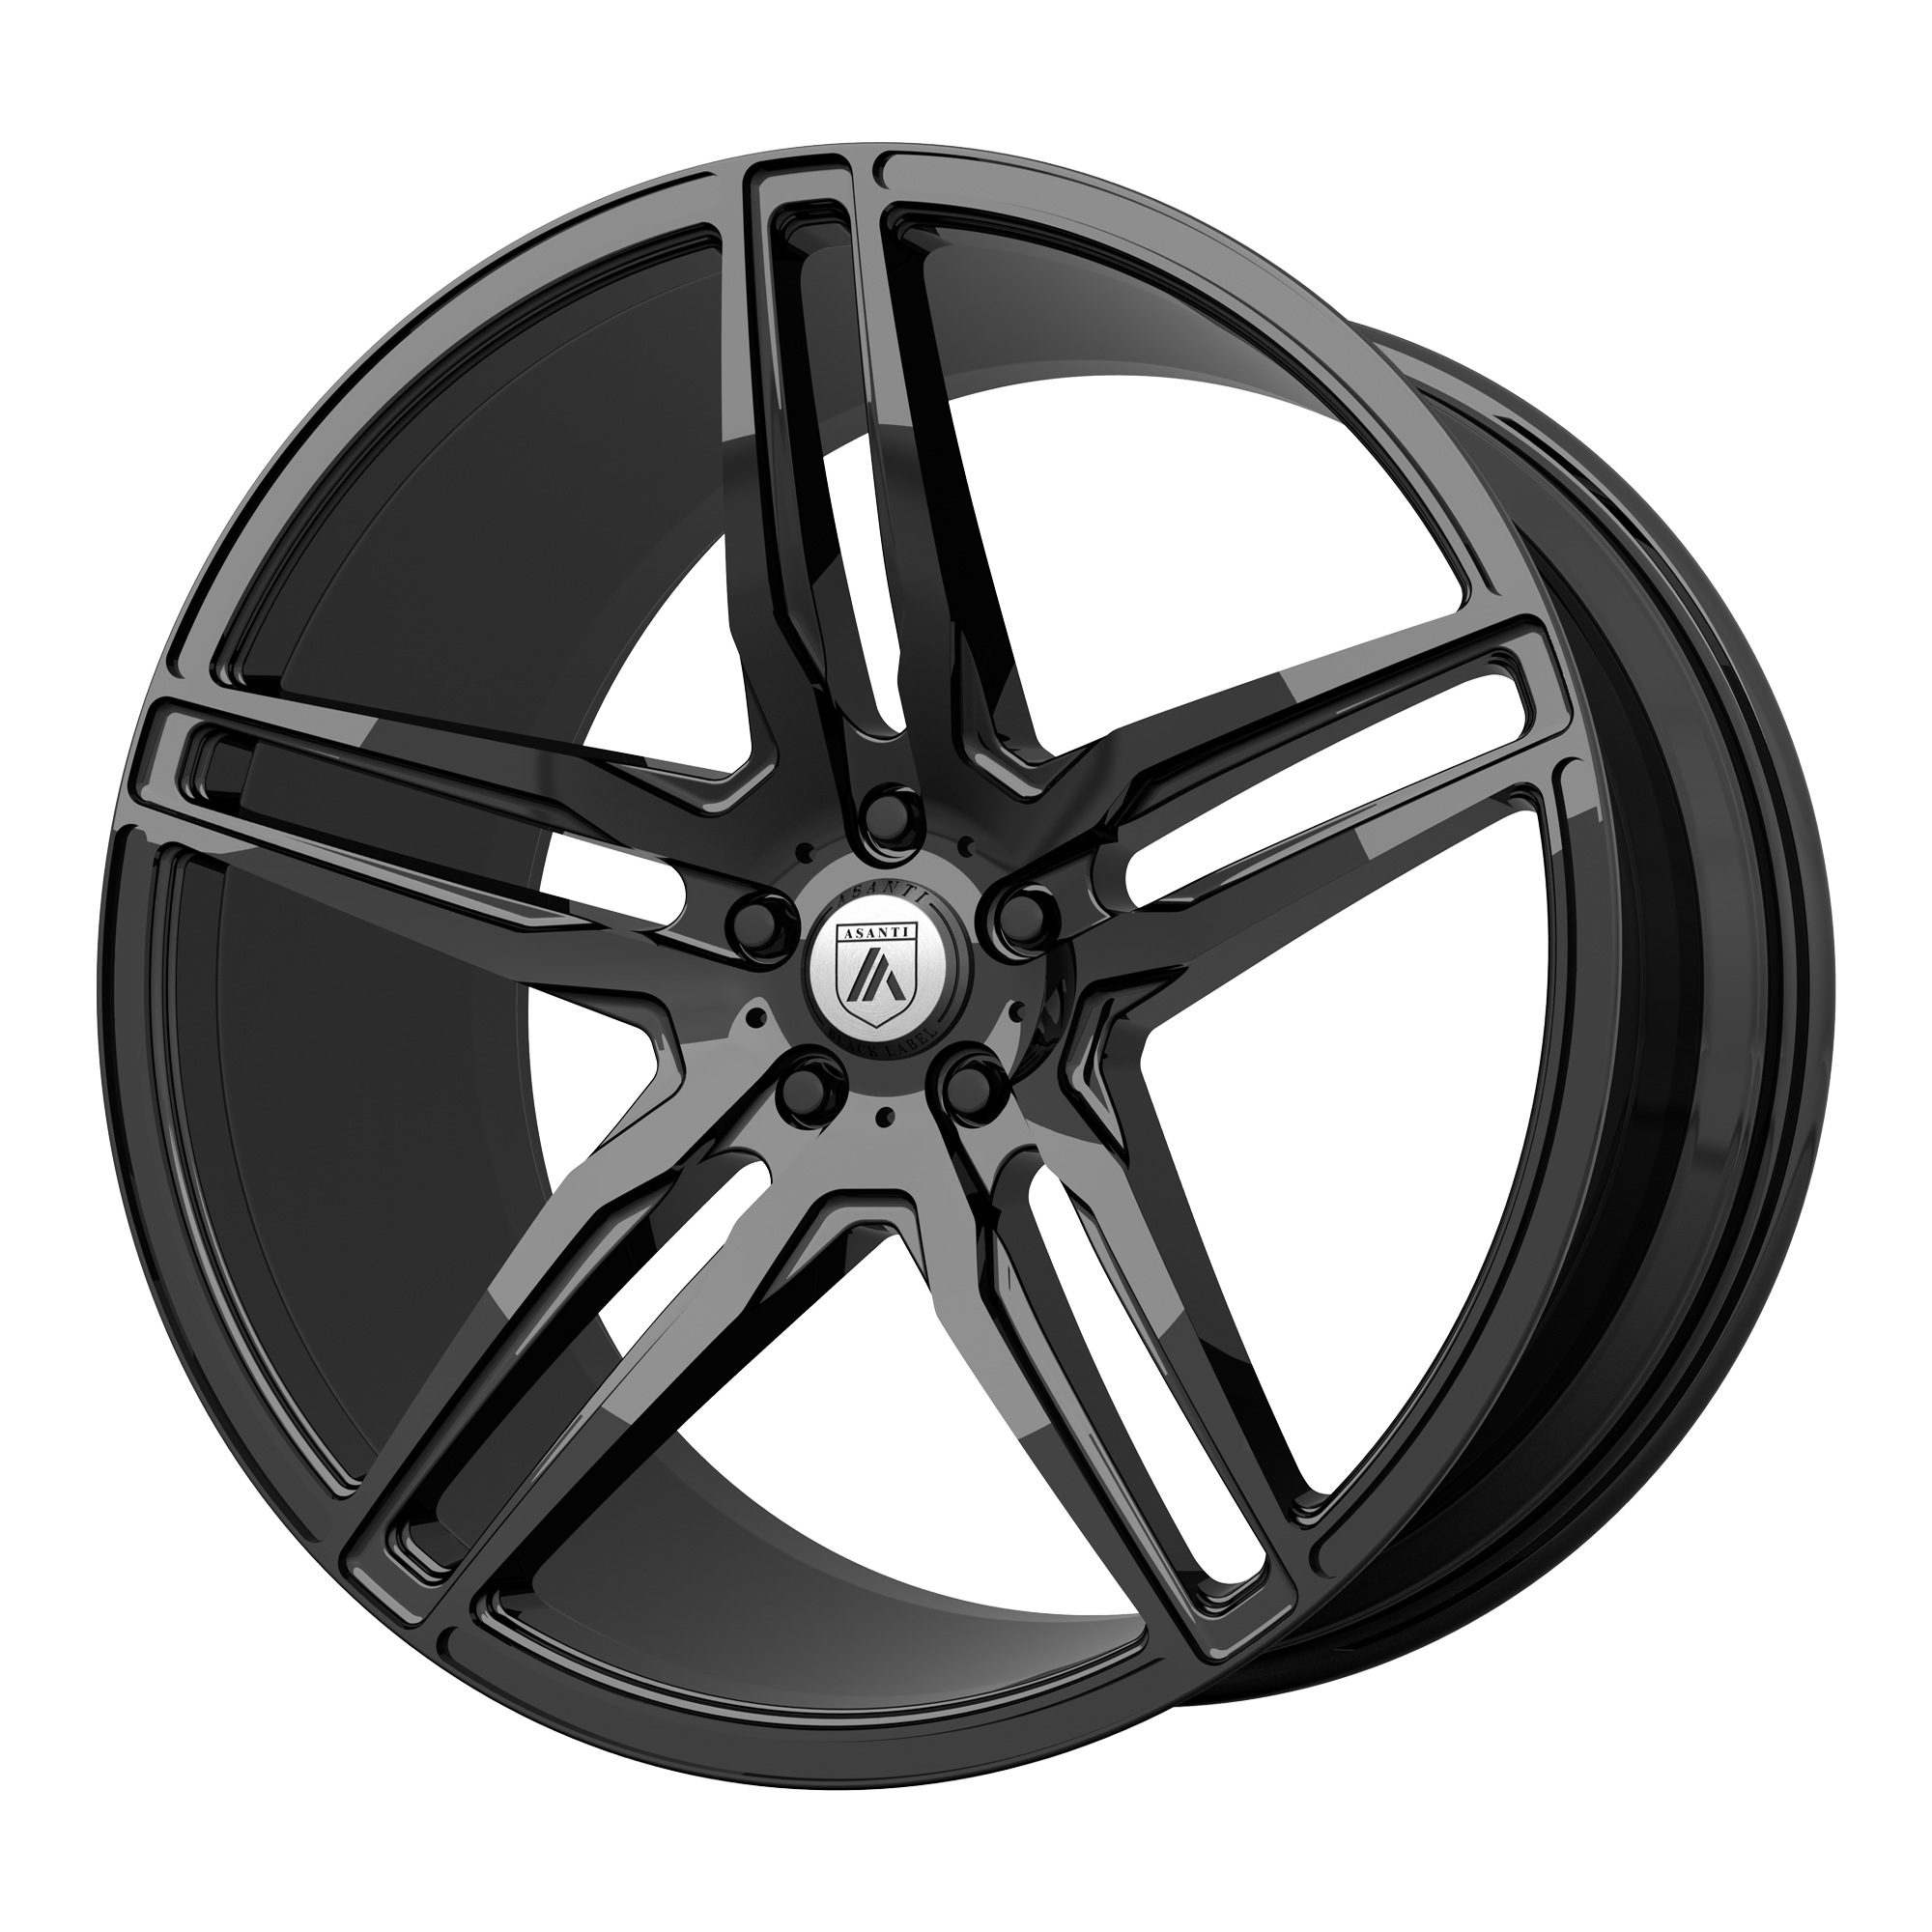 ORION 20x9 5x114.30 GLOSS BLACK (35 mm) - Tires and Engine Performance